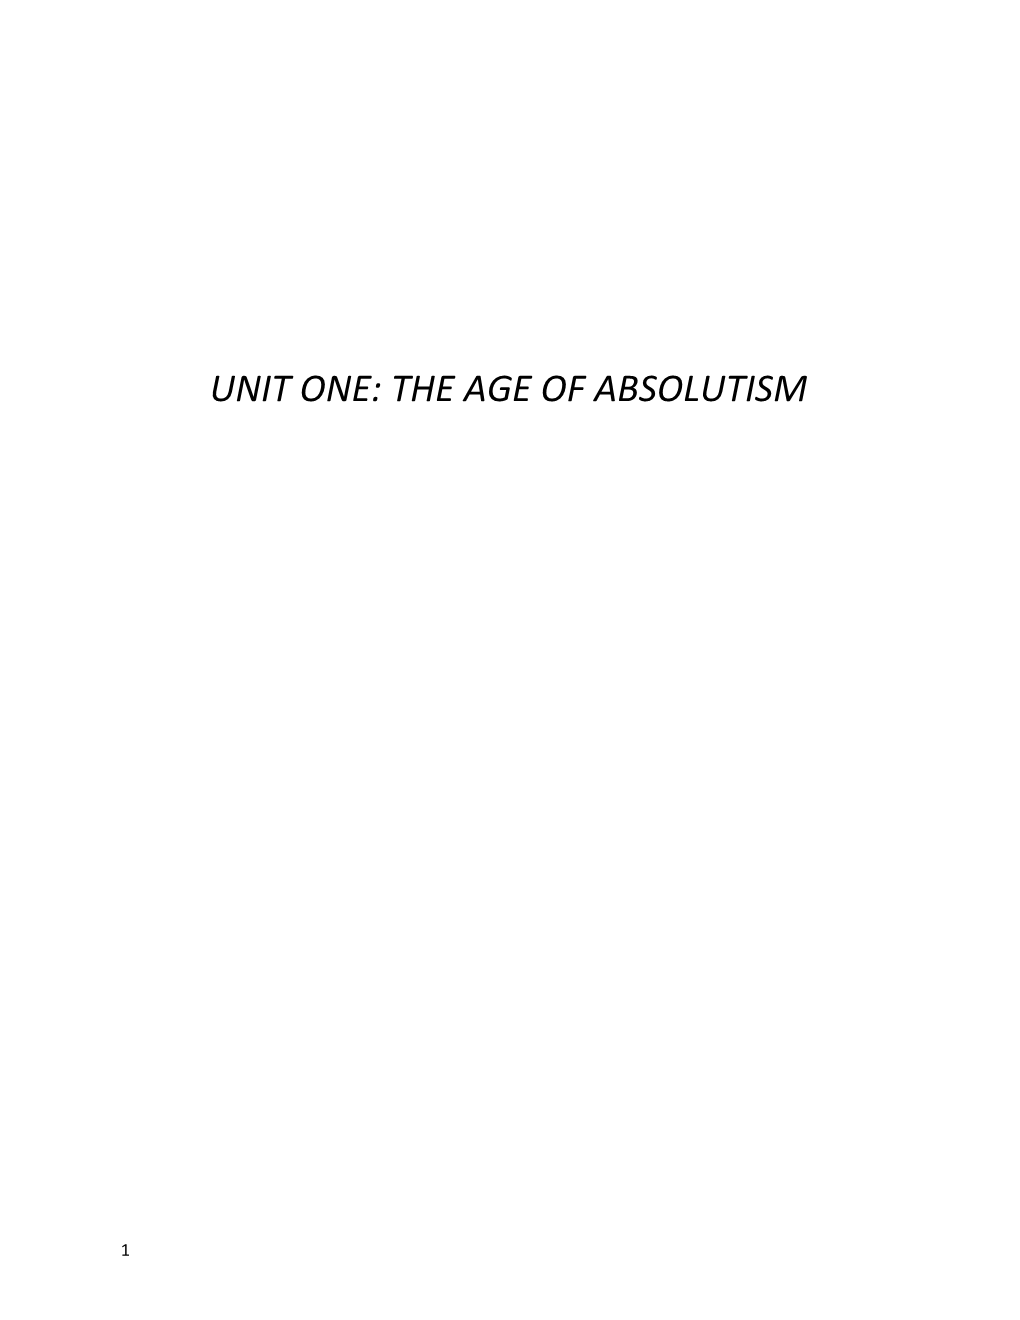 Unit One: the Age of Absolutism